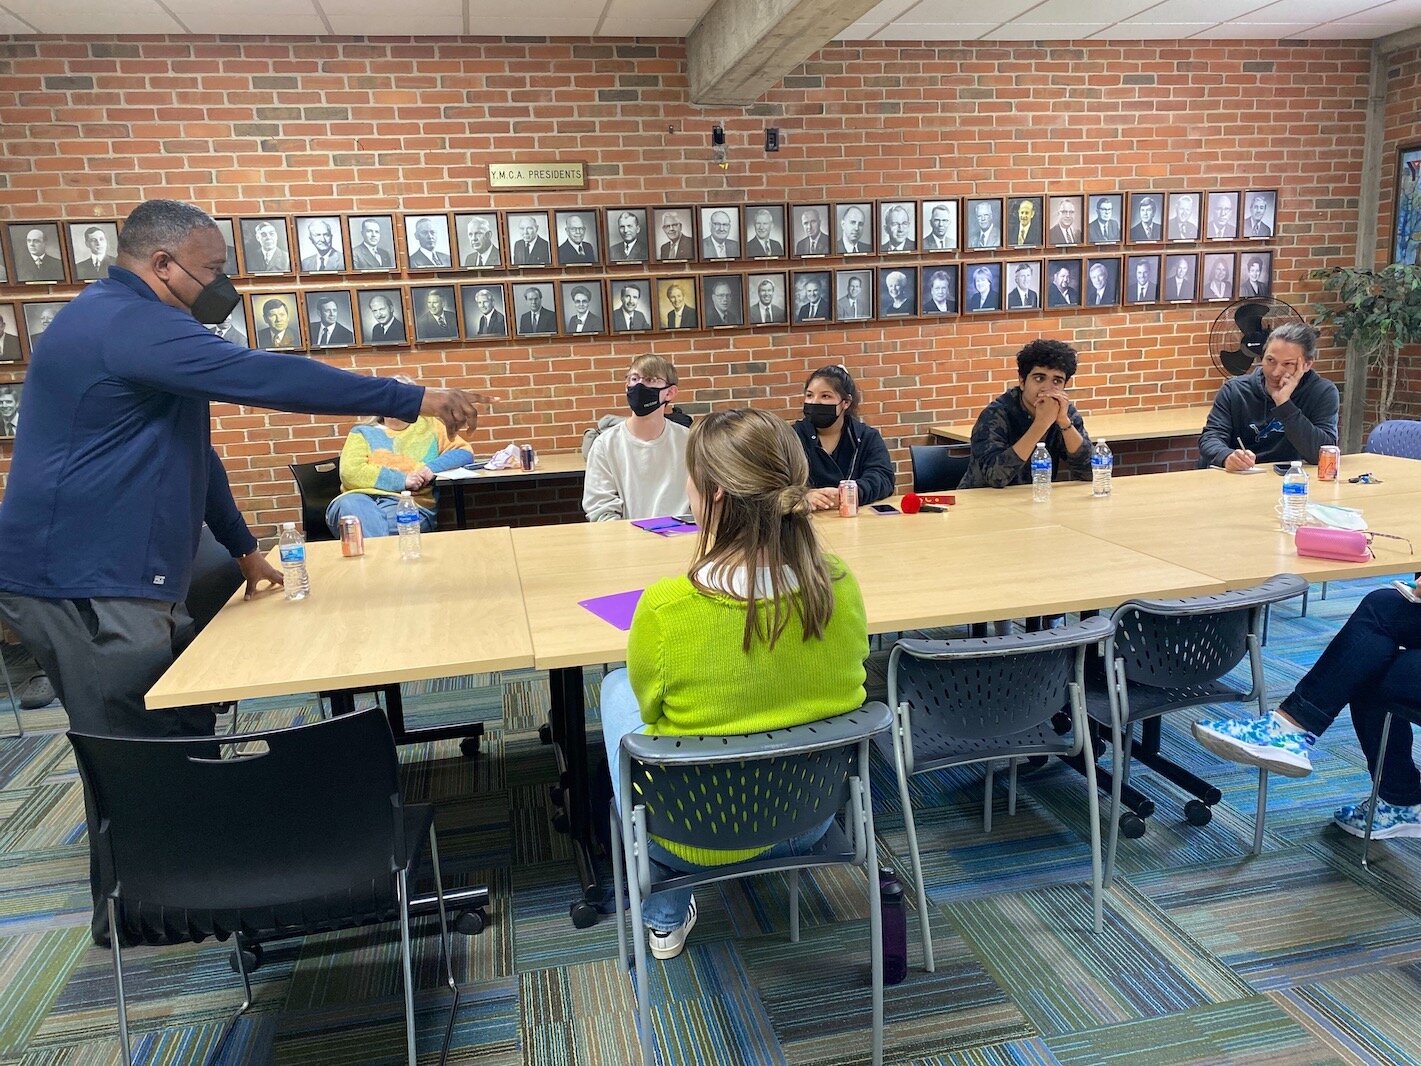 Victor Ledbetter talks to the participants in the Voices of Youth program about the role of police officers in the community and offers advice on how to interact with them.